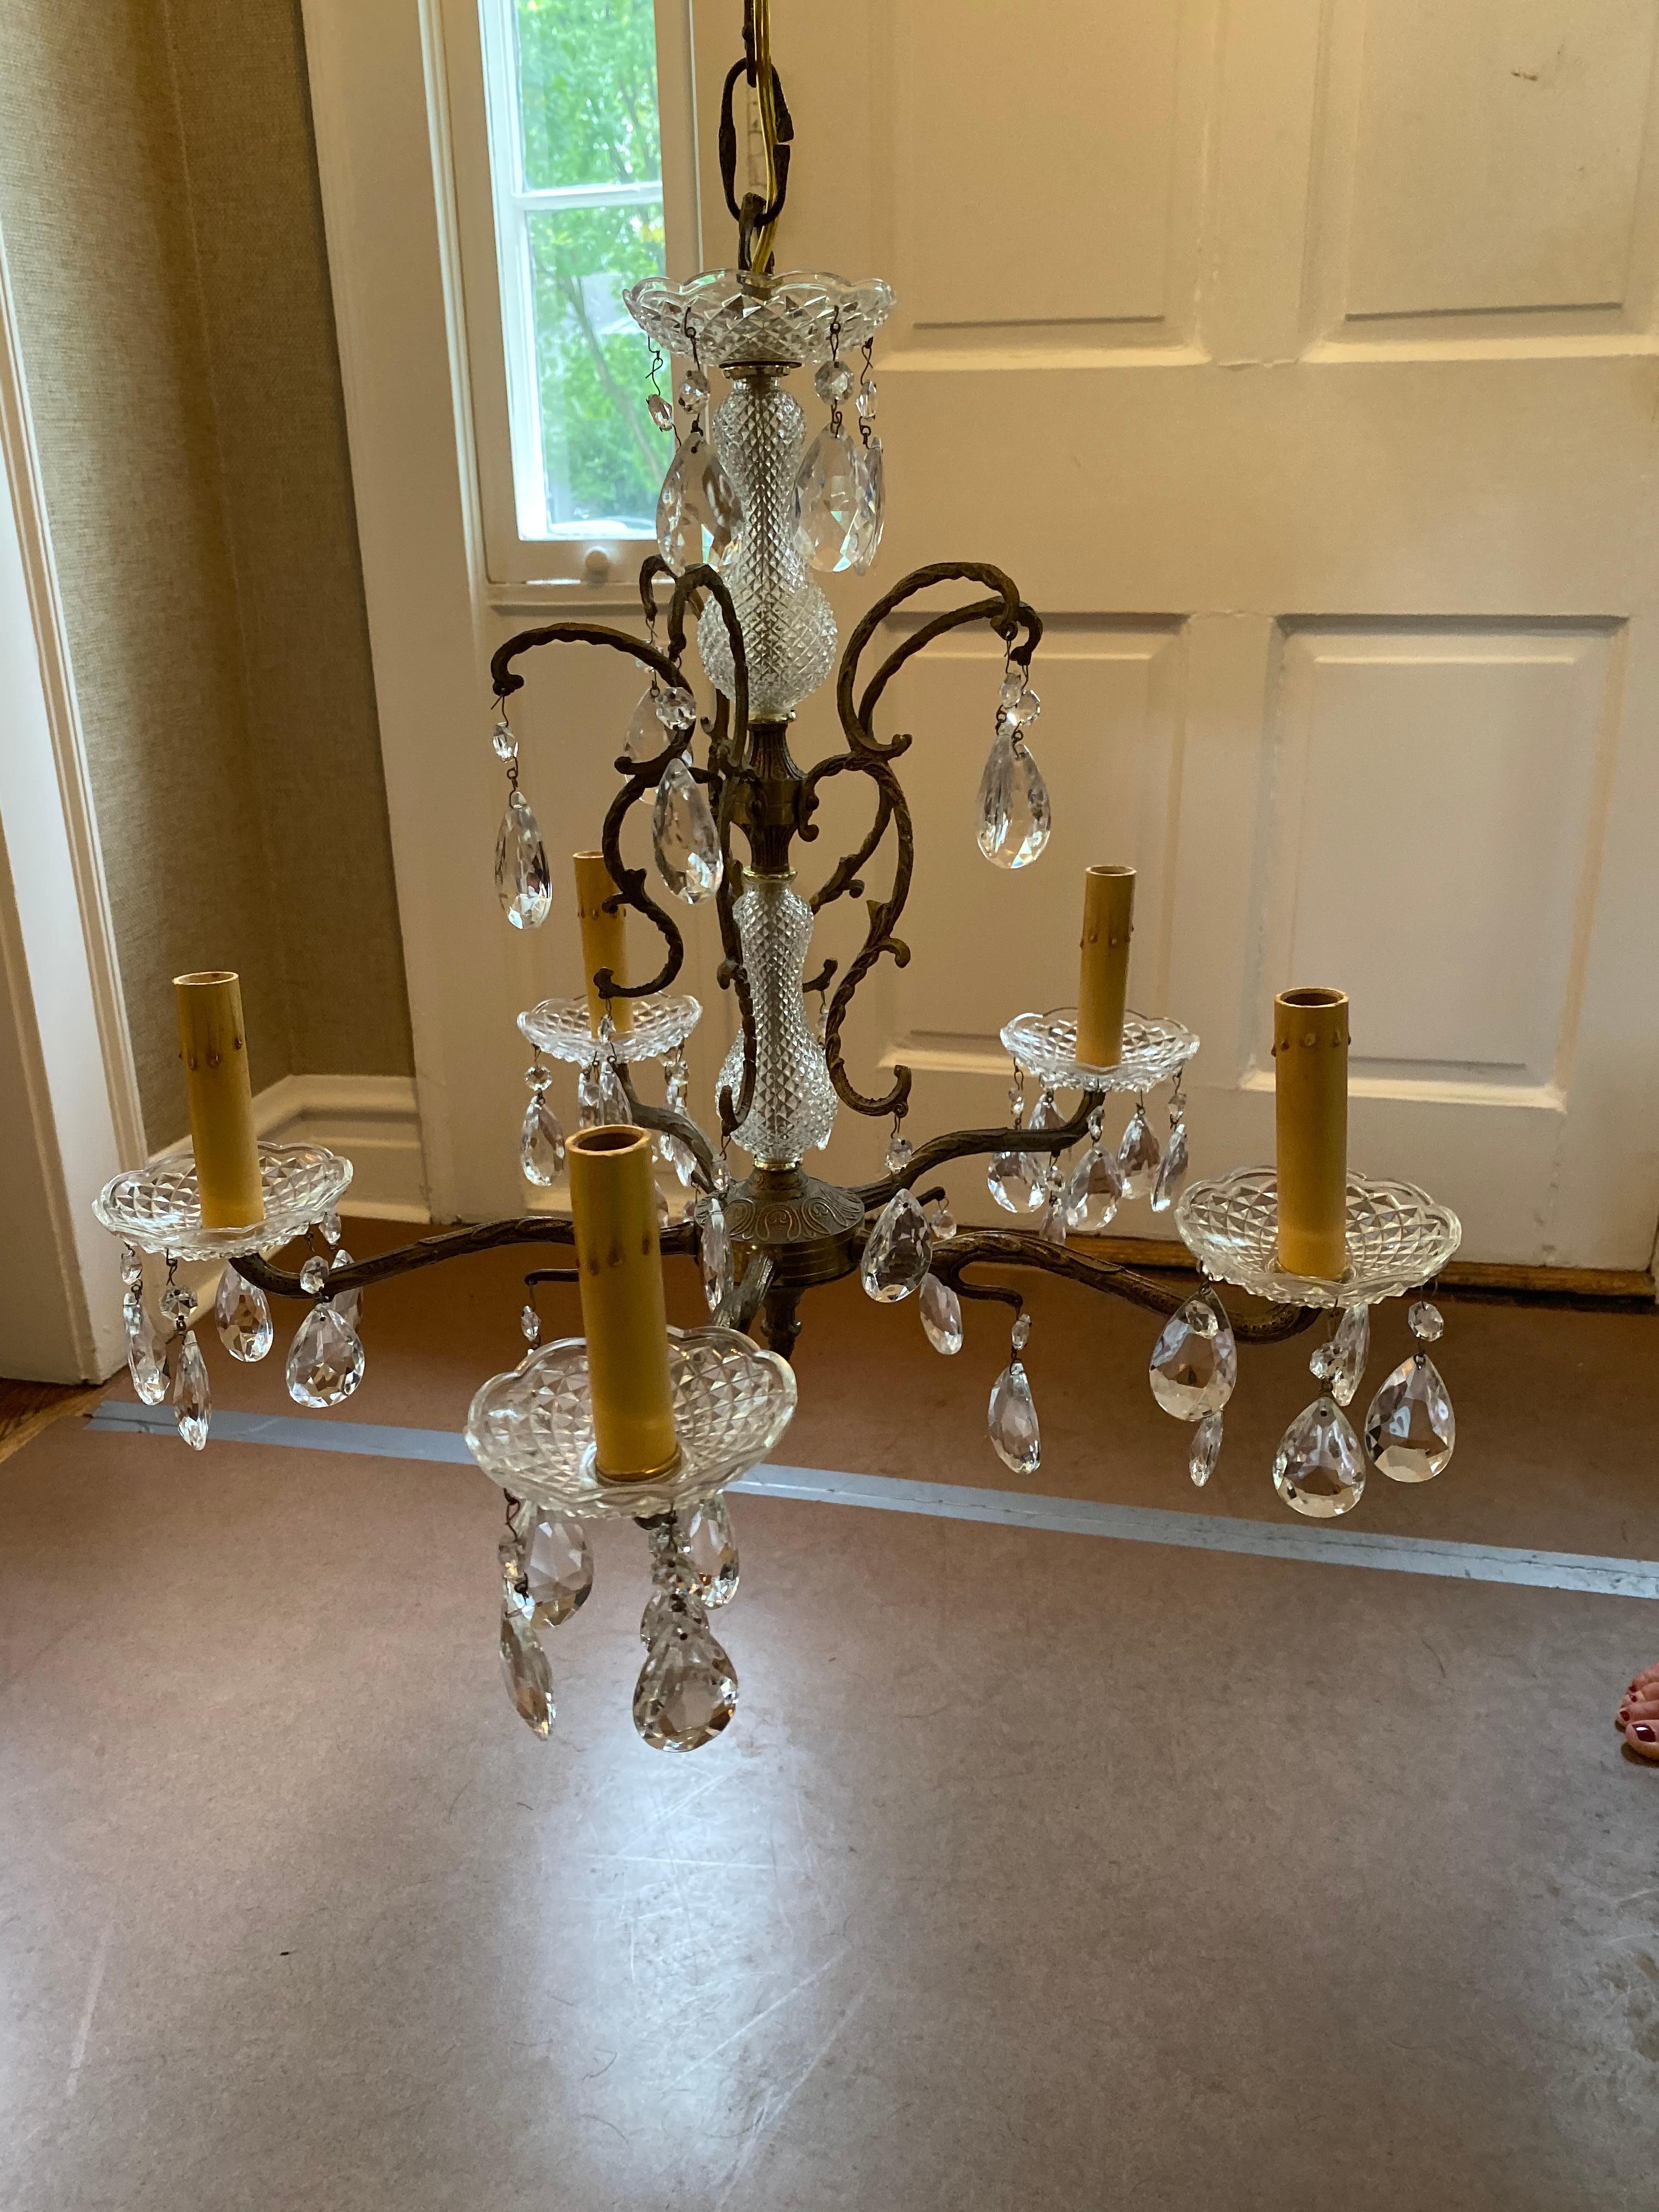 20th Century Vintage French Crystal and Bronze Chandelier from Marche Aux Puces, Paris For Sale